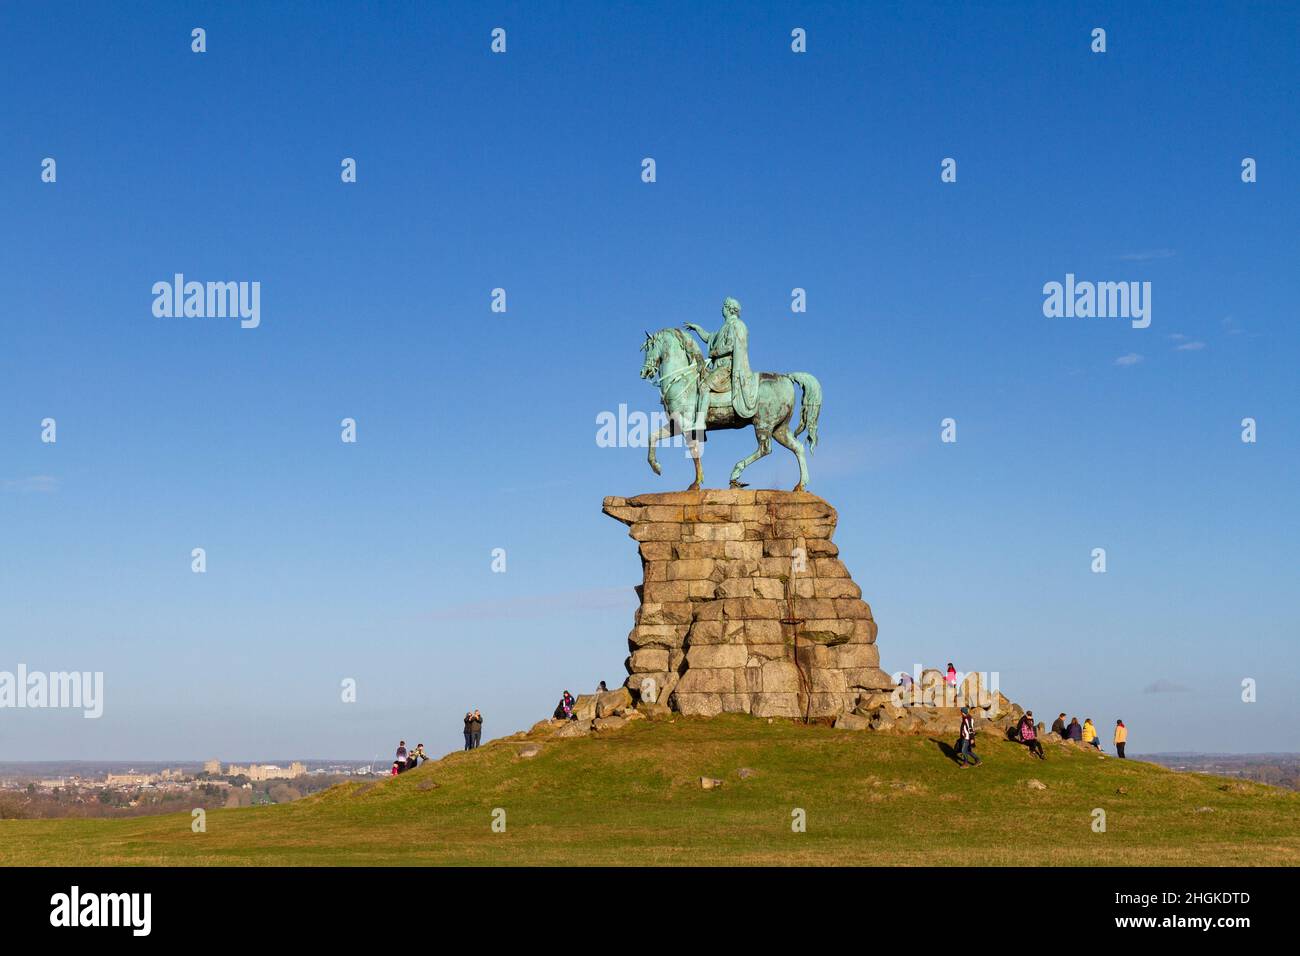 The Copper Horse George III statue (1831), Snow Hill, Windsor Great Park, UK. Stock Photo